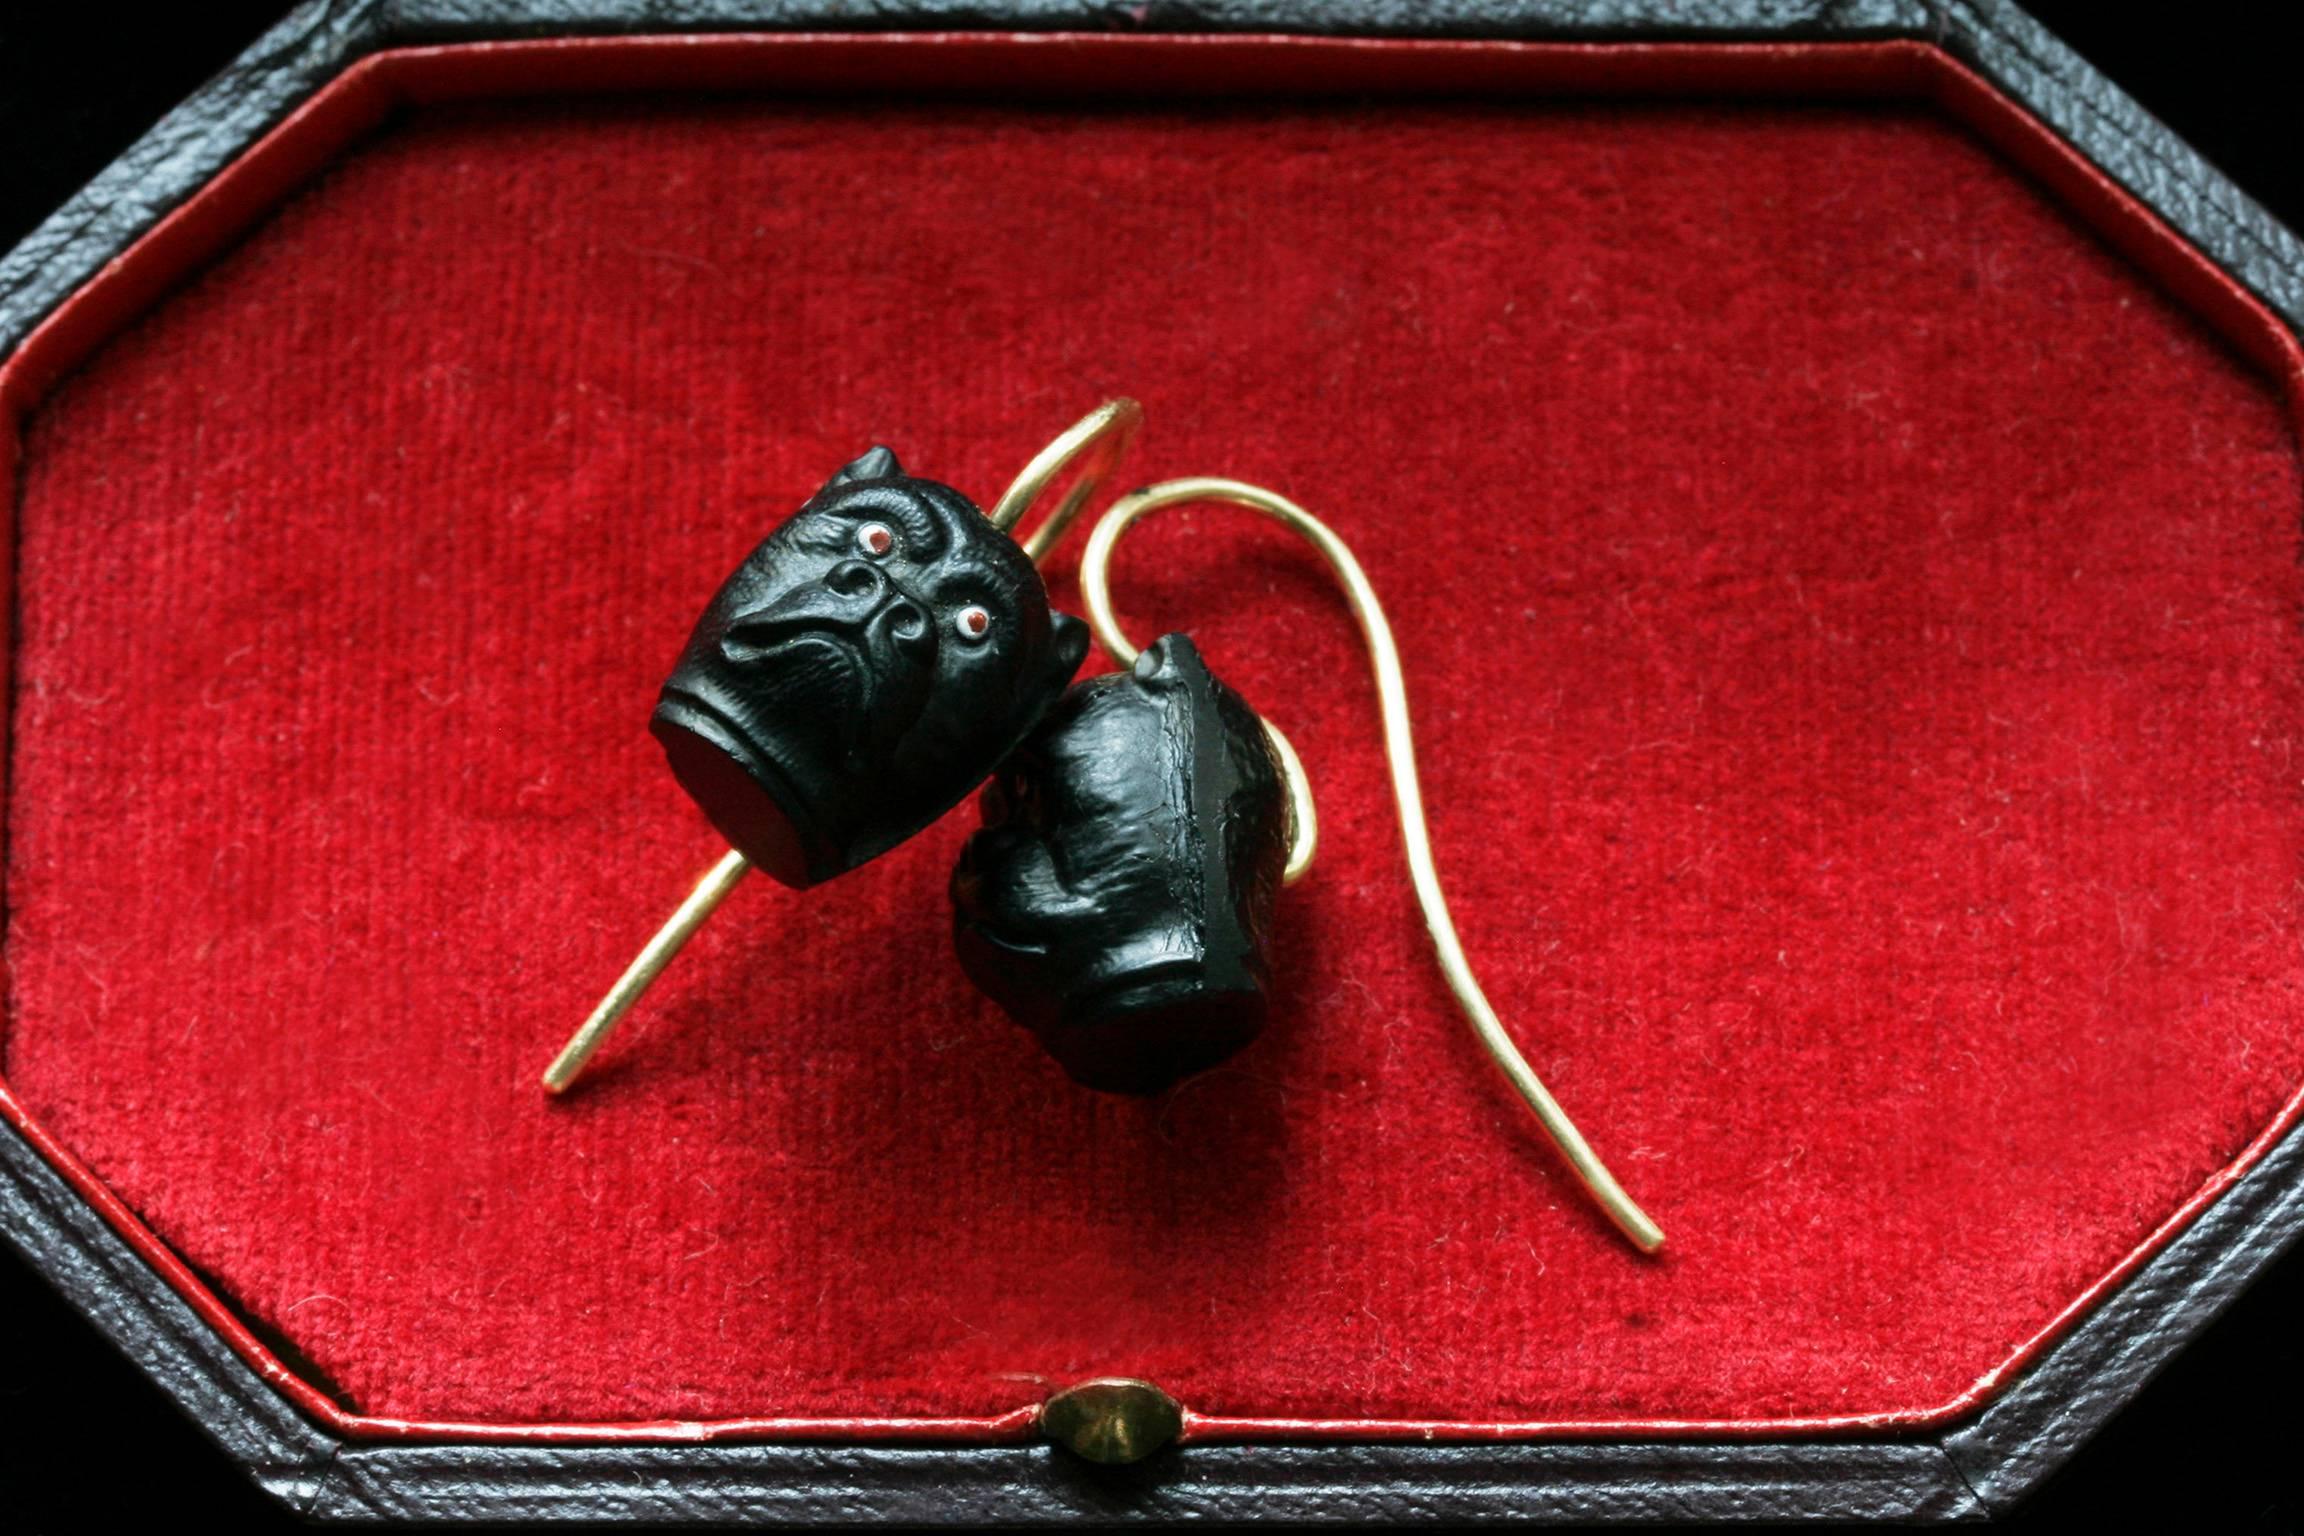 C.1890.  A pair of Victorian black bulldog earrings with whimsical facial expressions. The earrings are made of hard glass. They have new 18k wires. In very good condition.

Total Drop: Approximately 24mm (including the front hook)